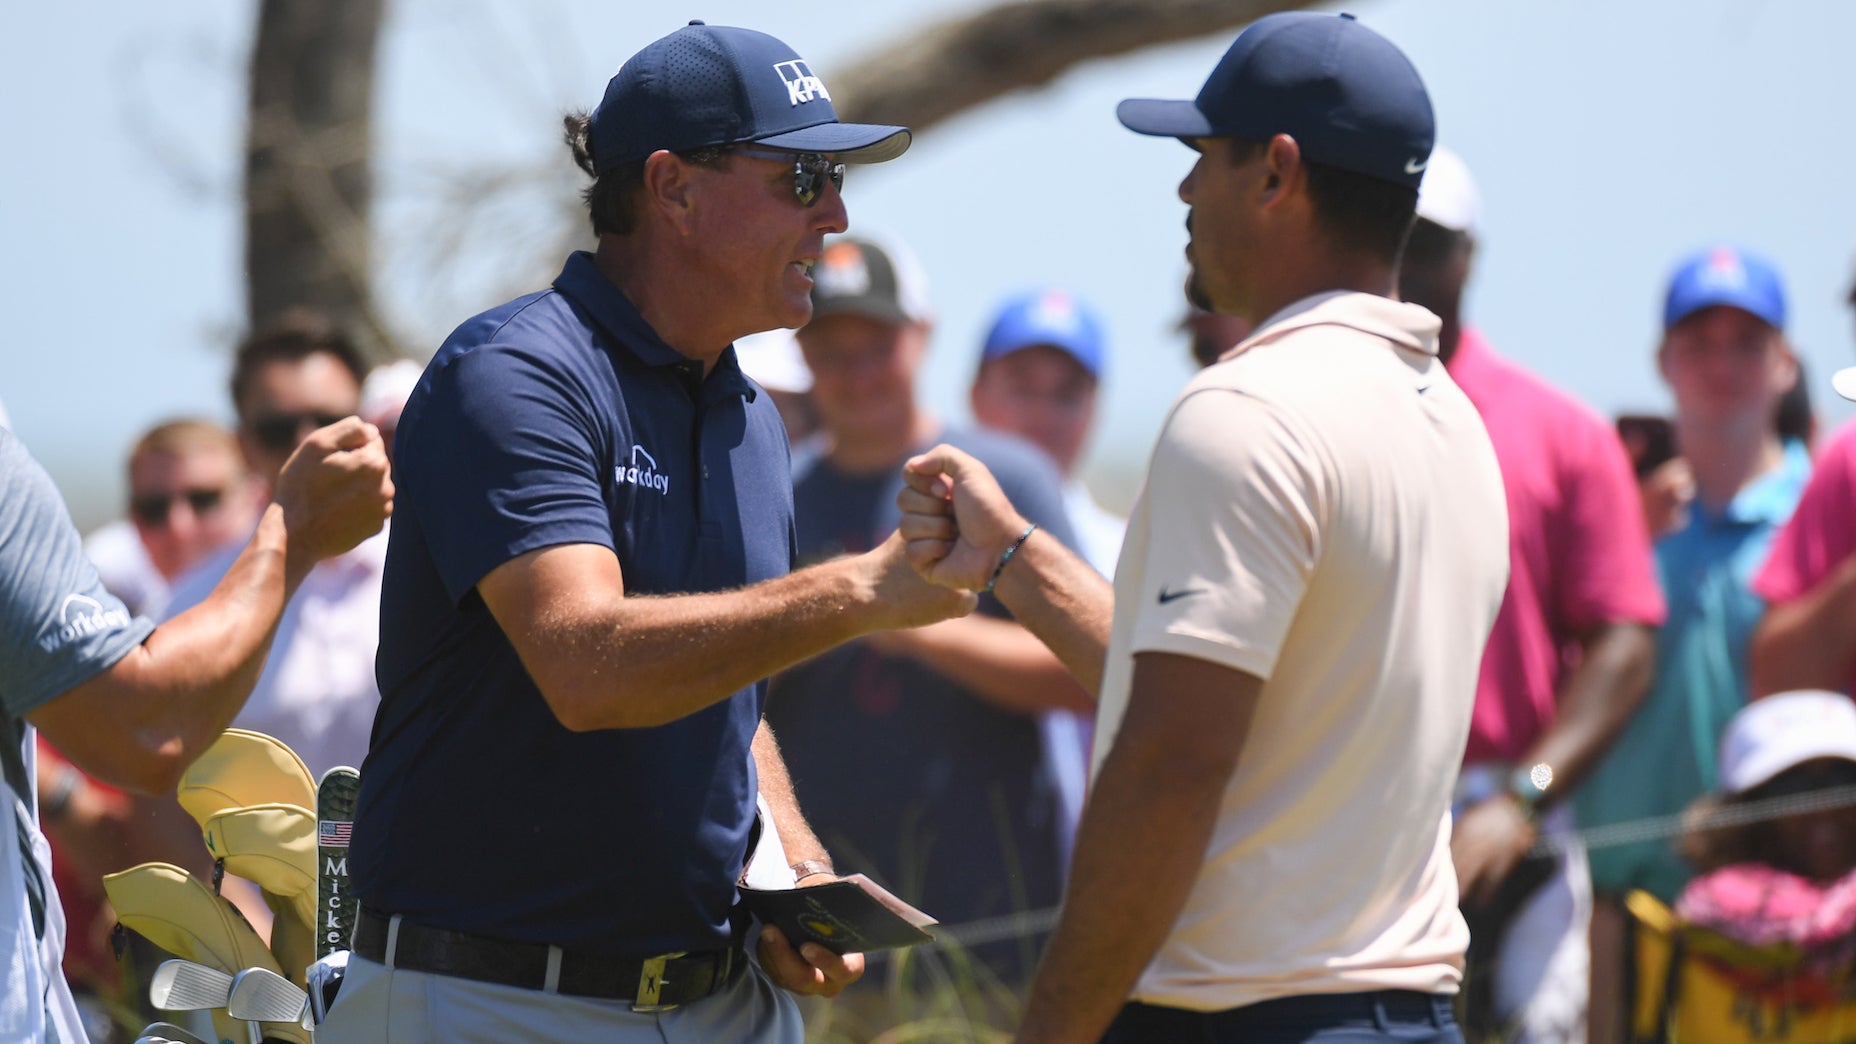 Phil Mickelson reveals mind games he played on Brooks Koepka at PGA